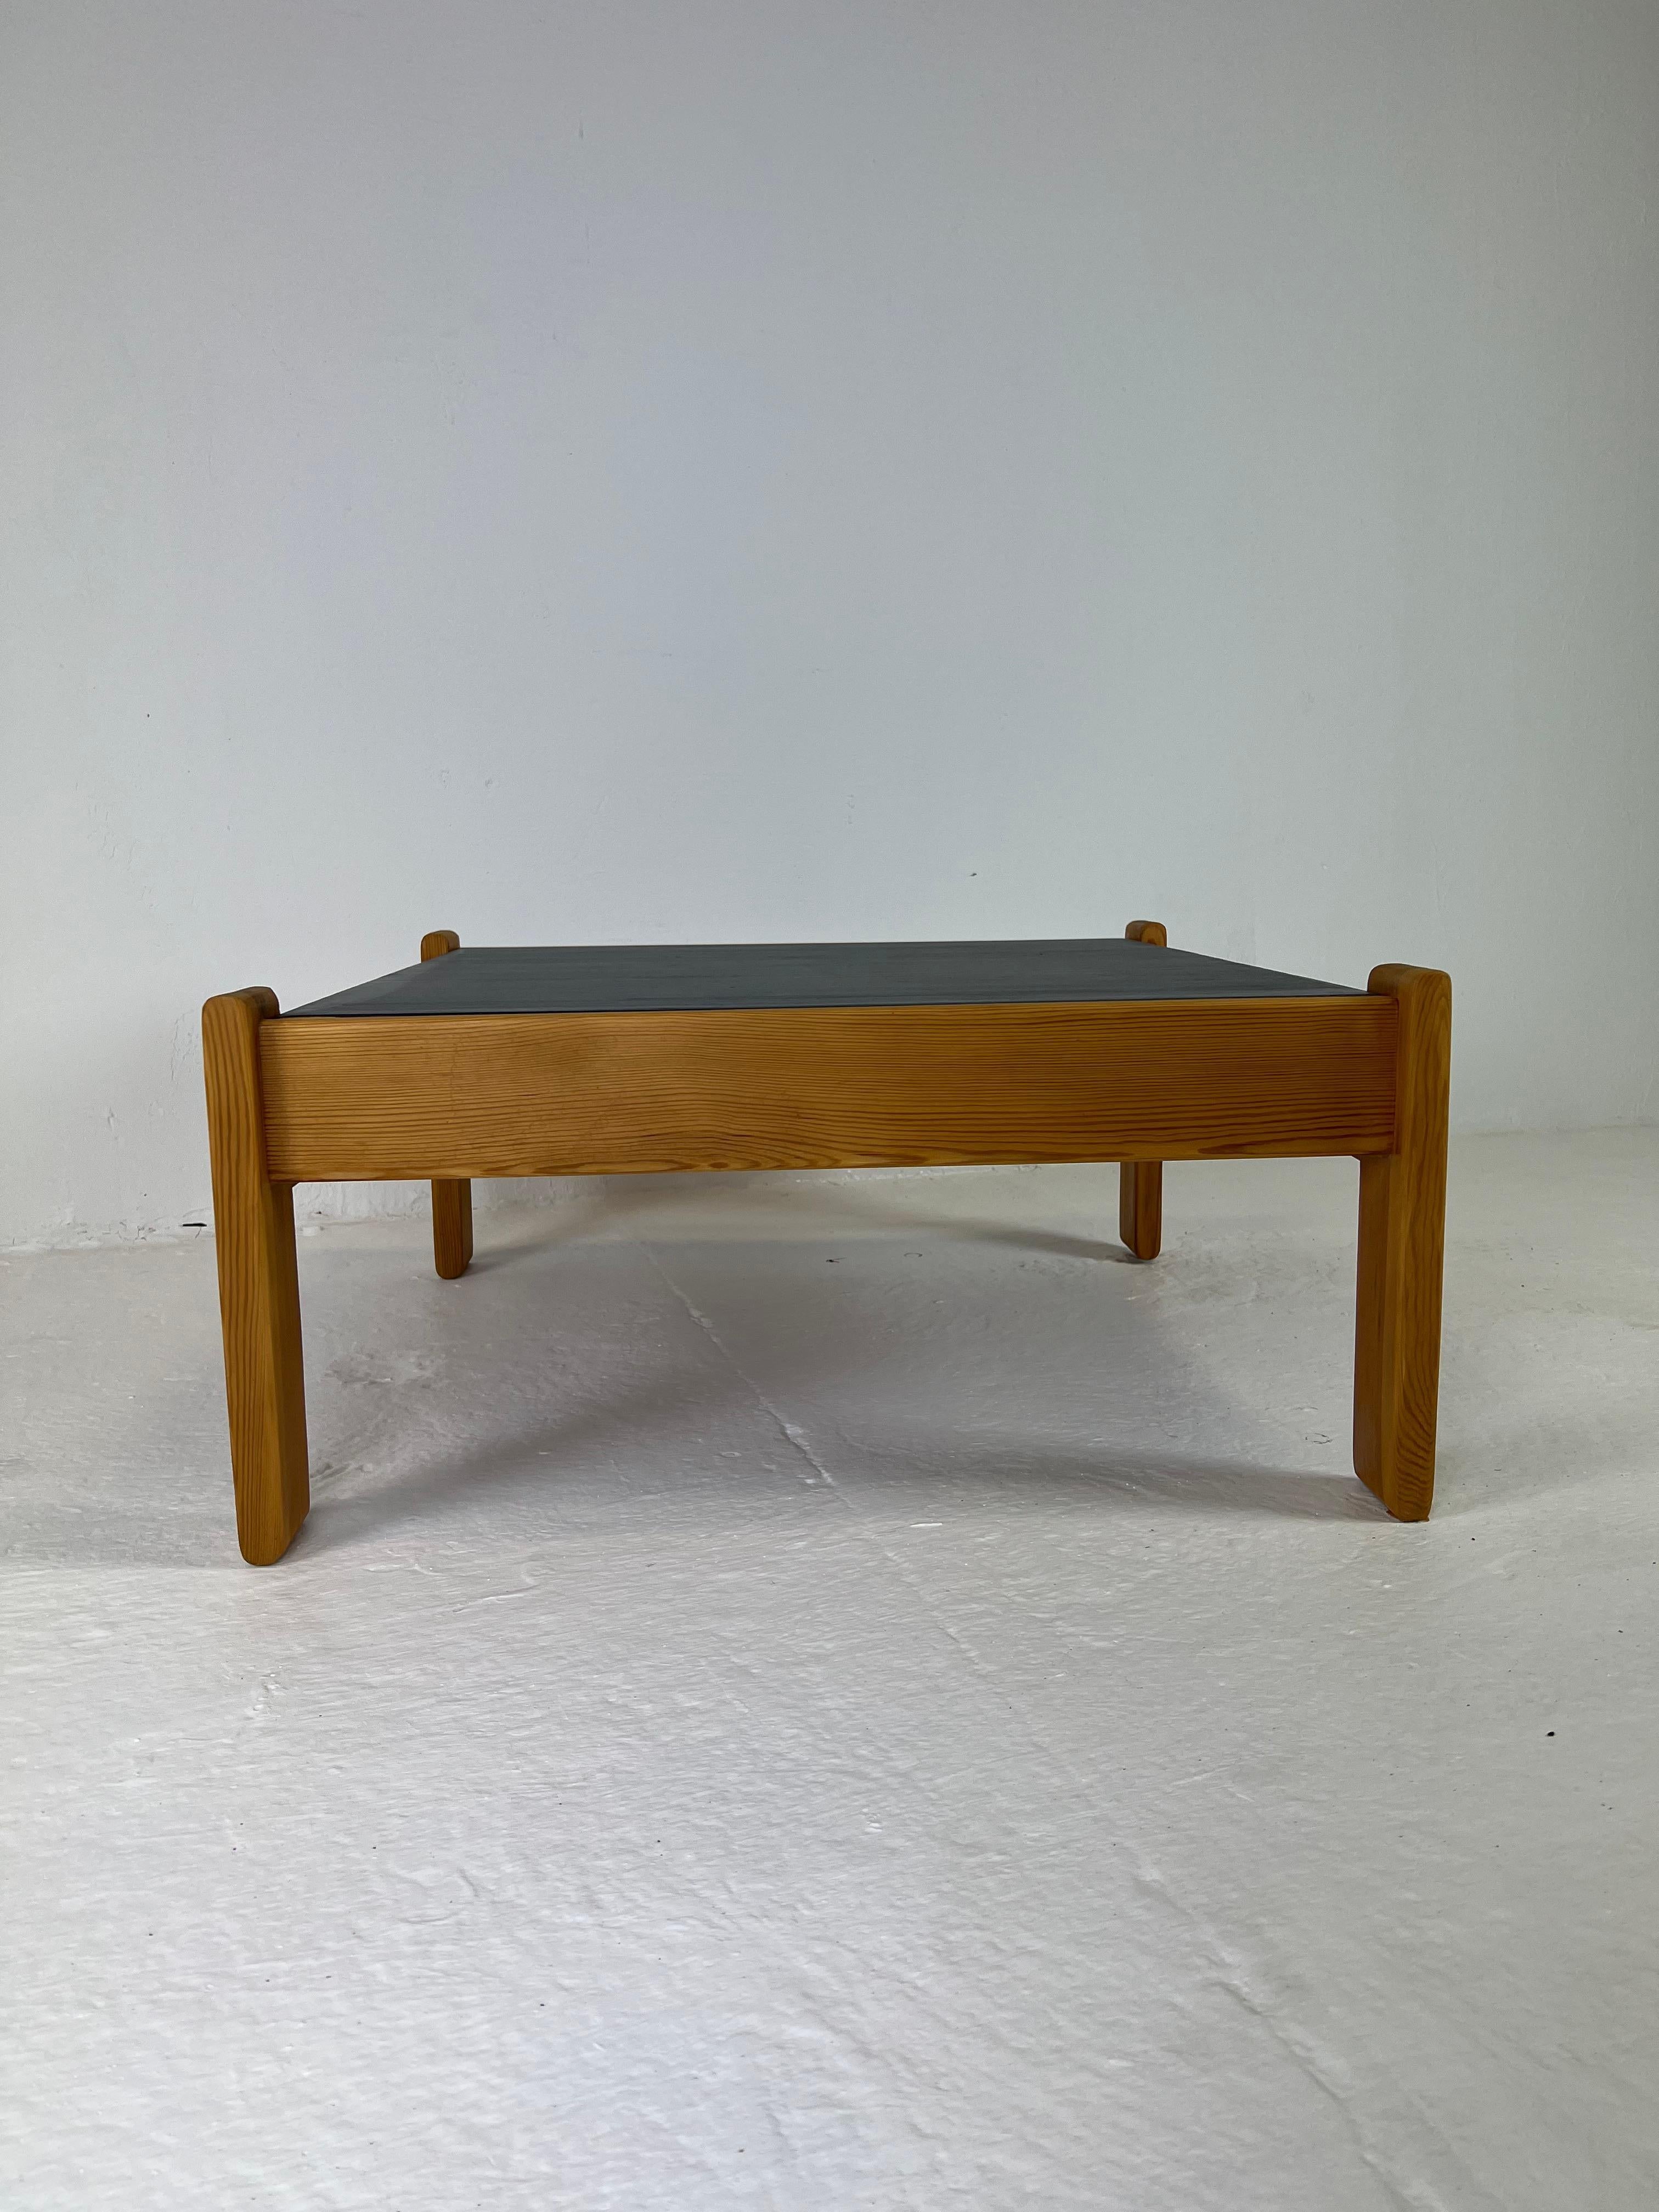 Two-Sided Modernist Coffee Table in Pine Wood, 1970s For Sale 4